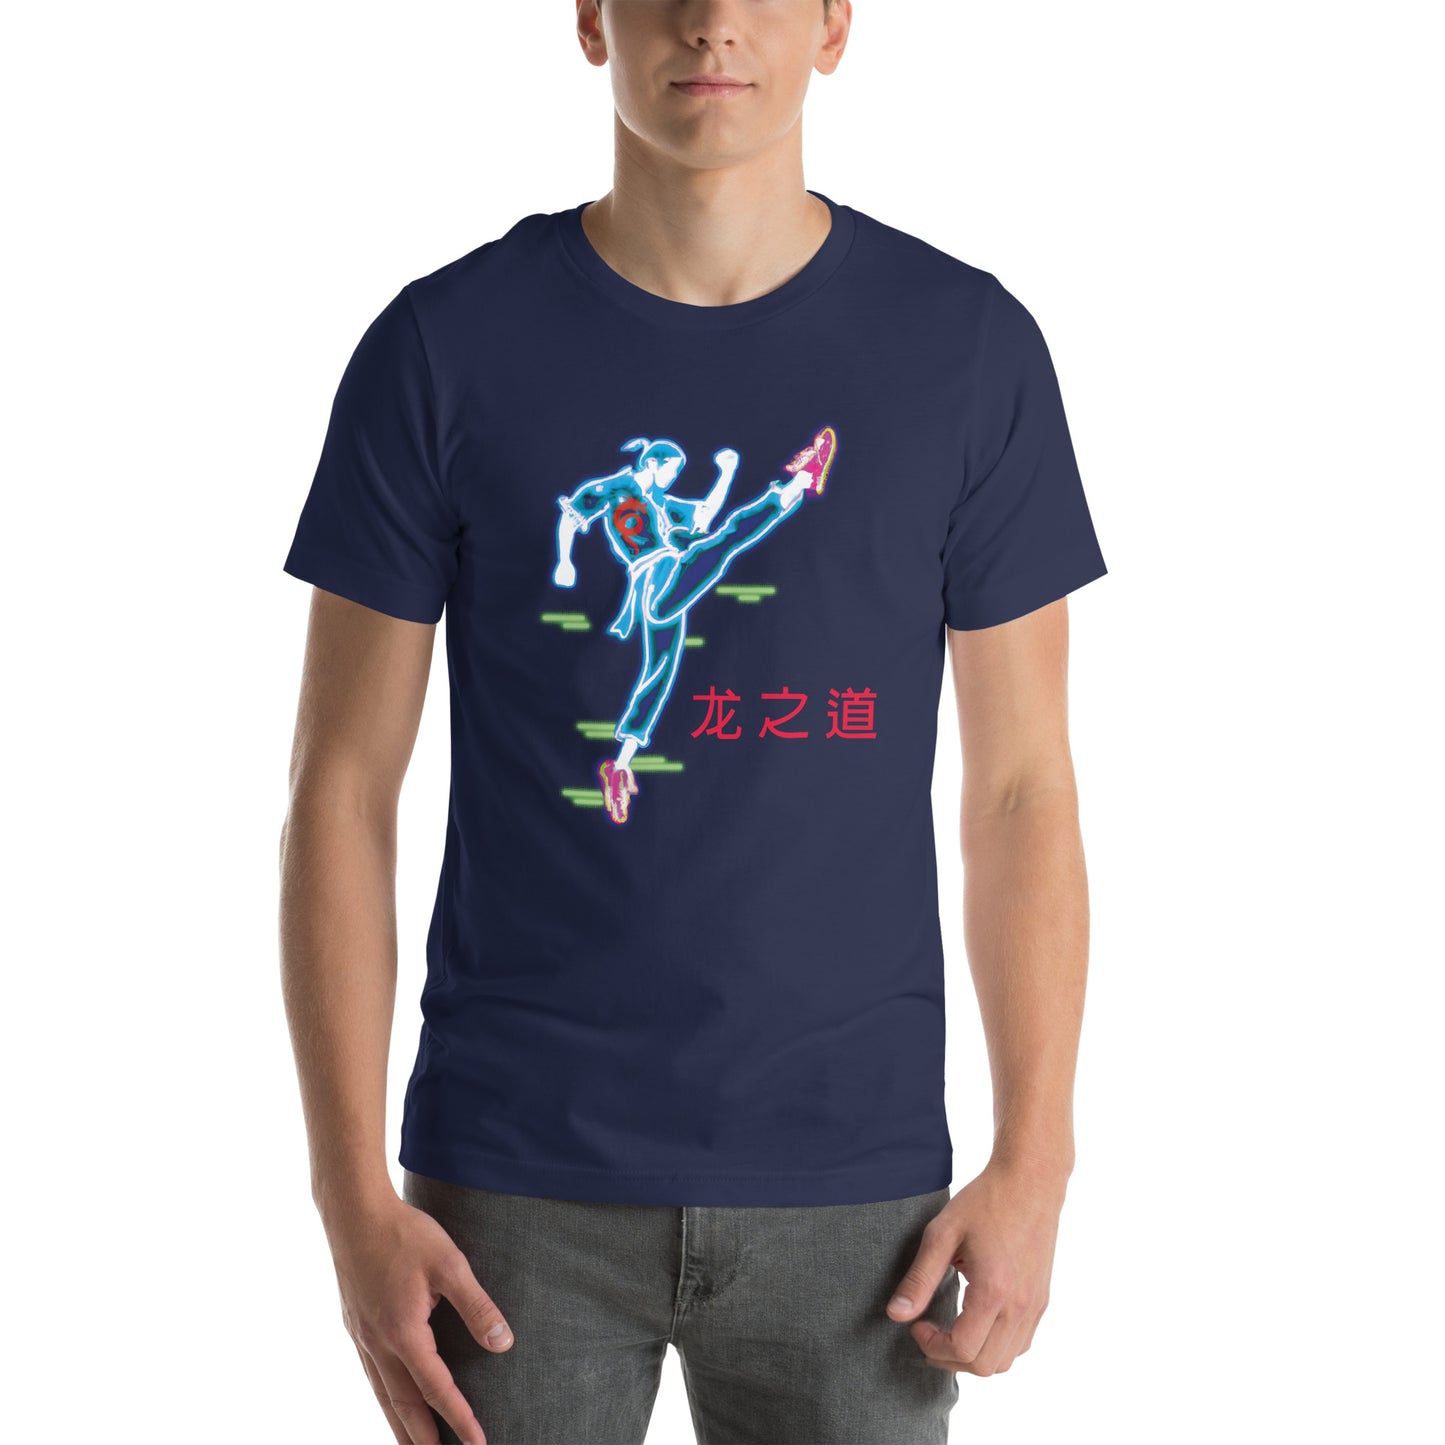 Navy blue T-Shirt featuring a neon-esque martial arts fighter with red Cantonese text stating 'Way of the Dragon' from the TEQNEON Neolific collection, called CYBERFU